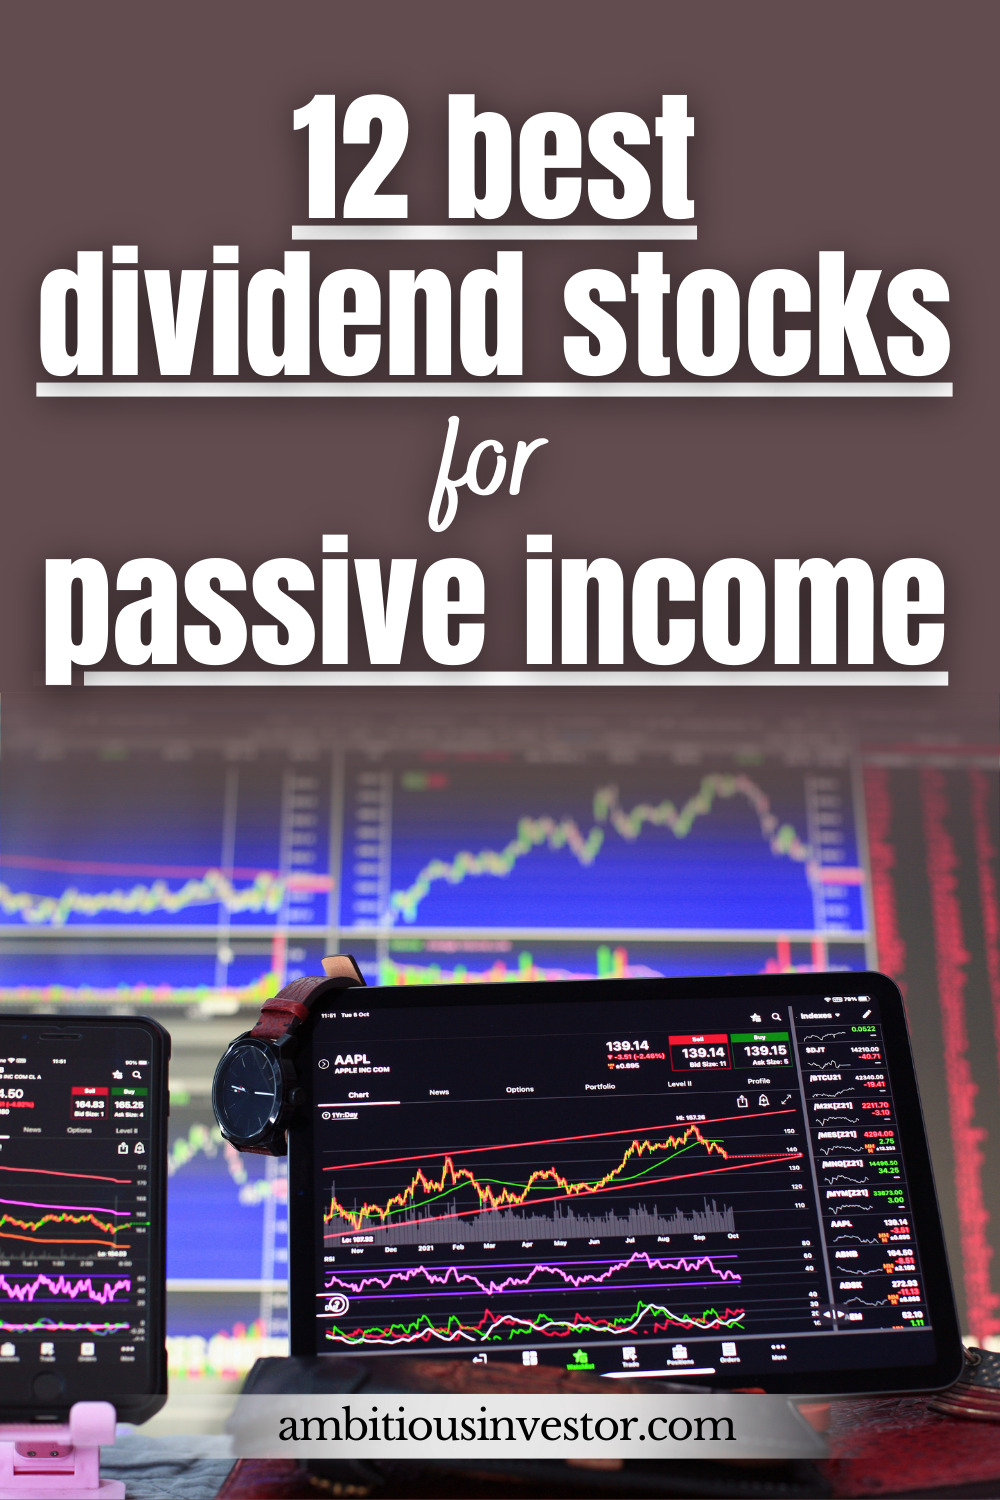 12 Best Dividend Stocks for Passive Income